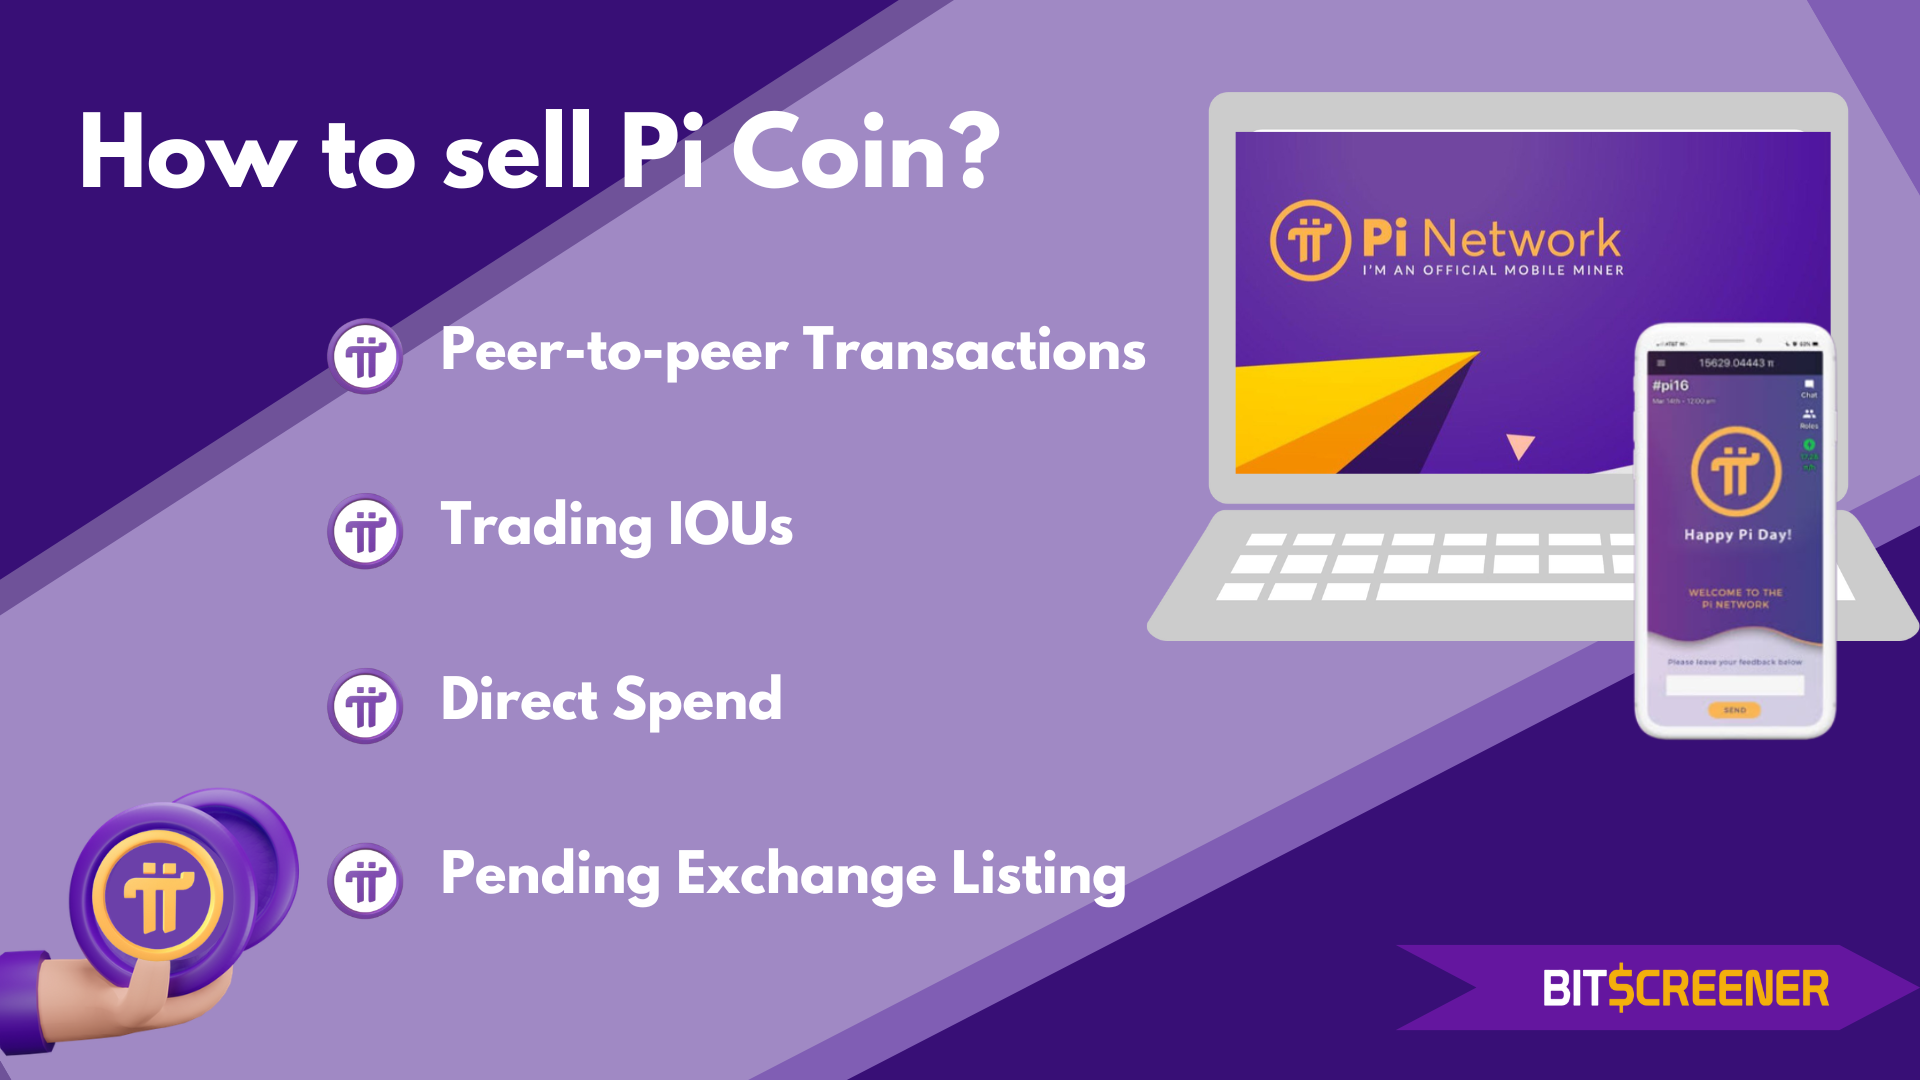 How to Sell Pi Coin.png